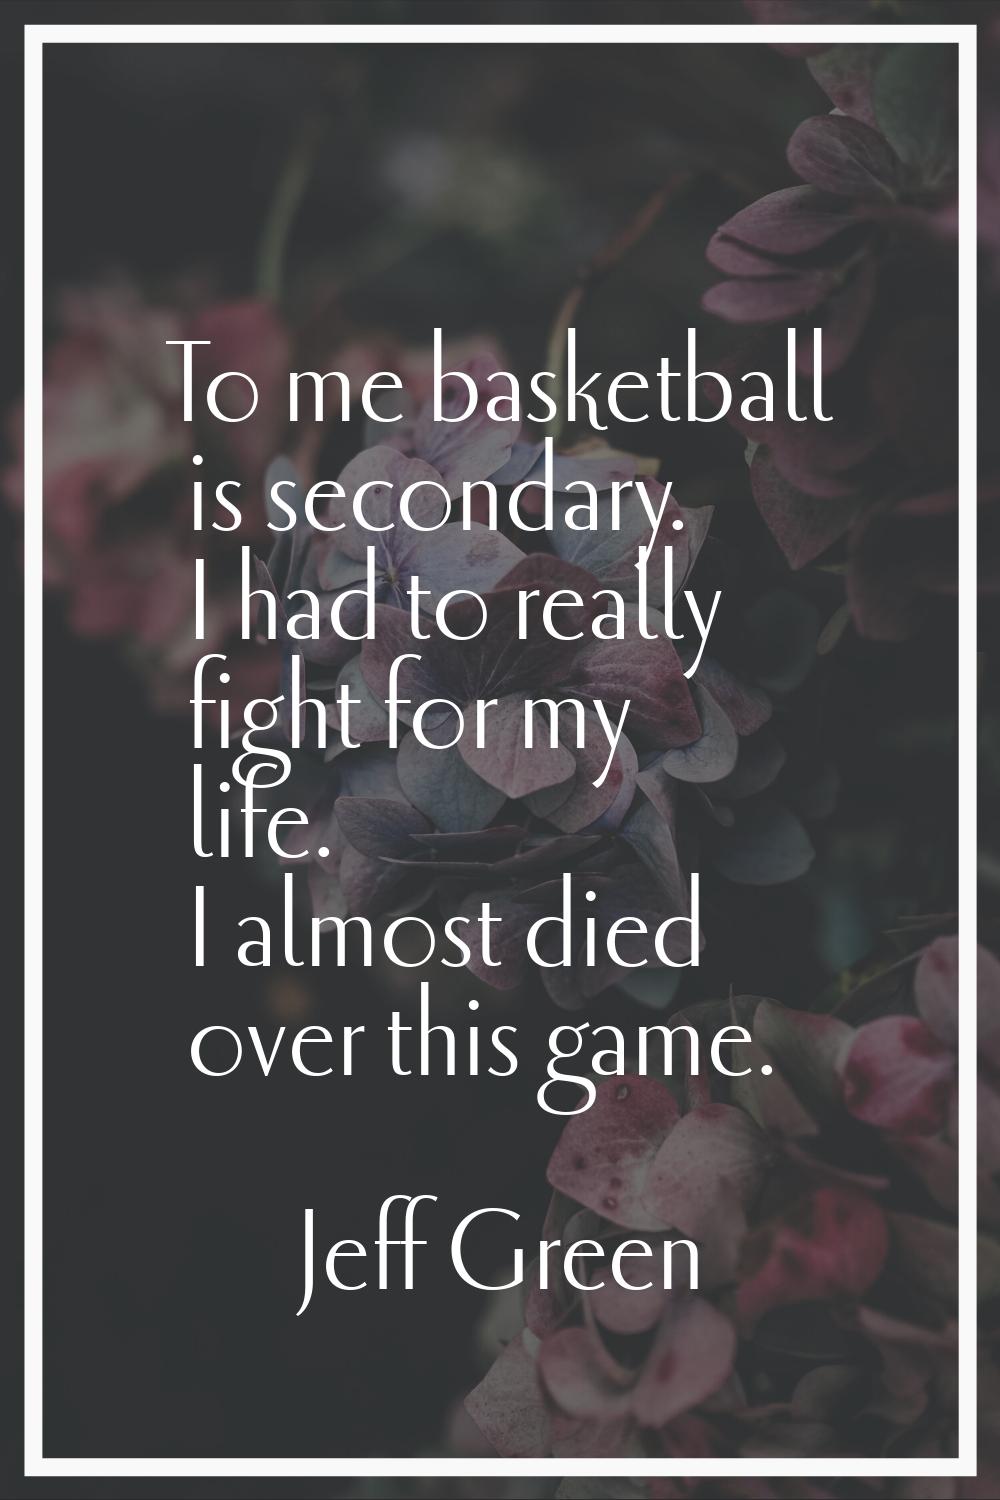 To me basketball is secondary. I had to really fight for my life. I almost died over this game.